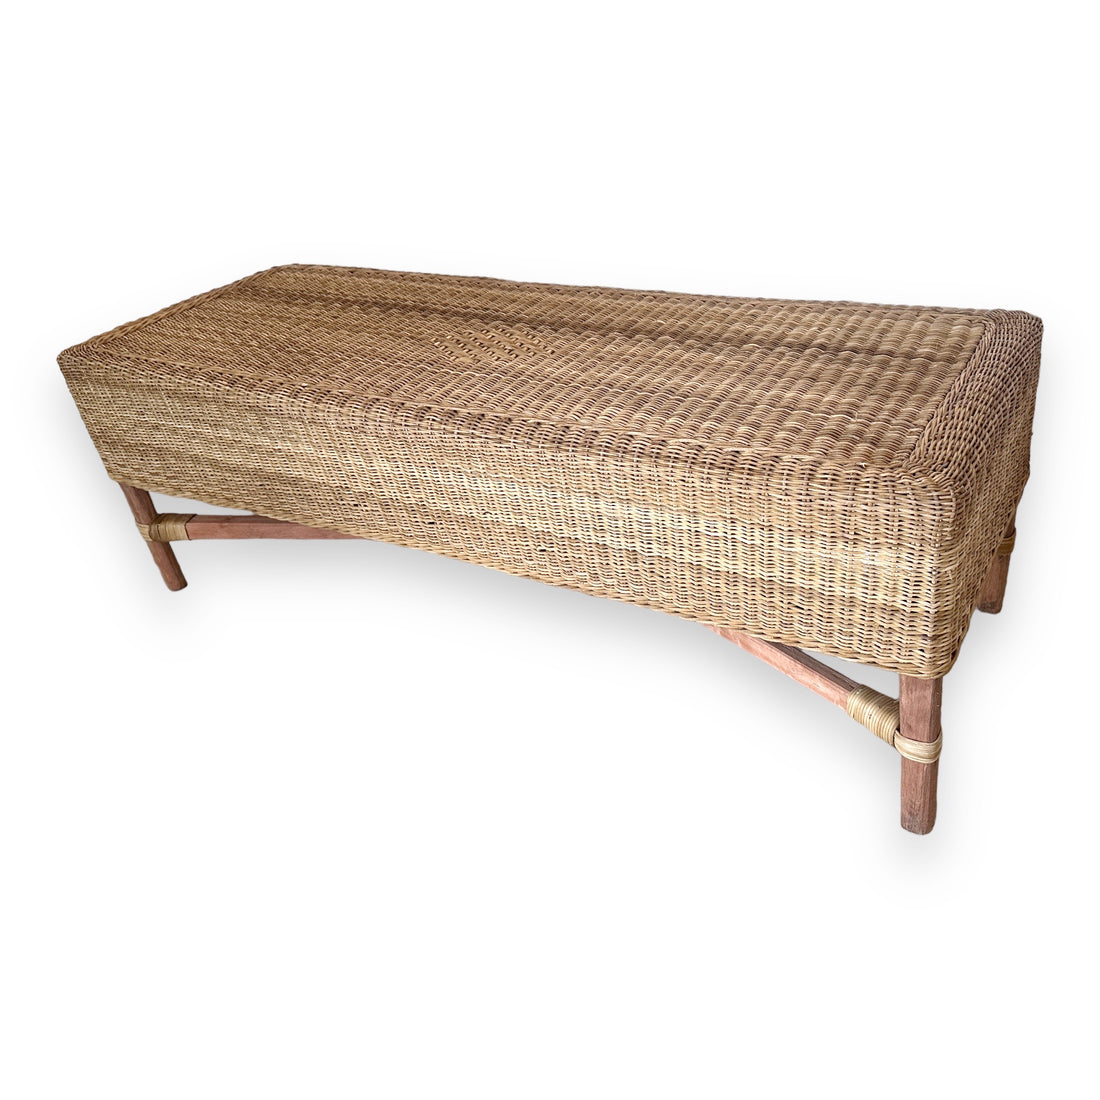 Malawi Cane Bench  - Solid Weave